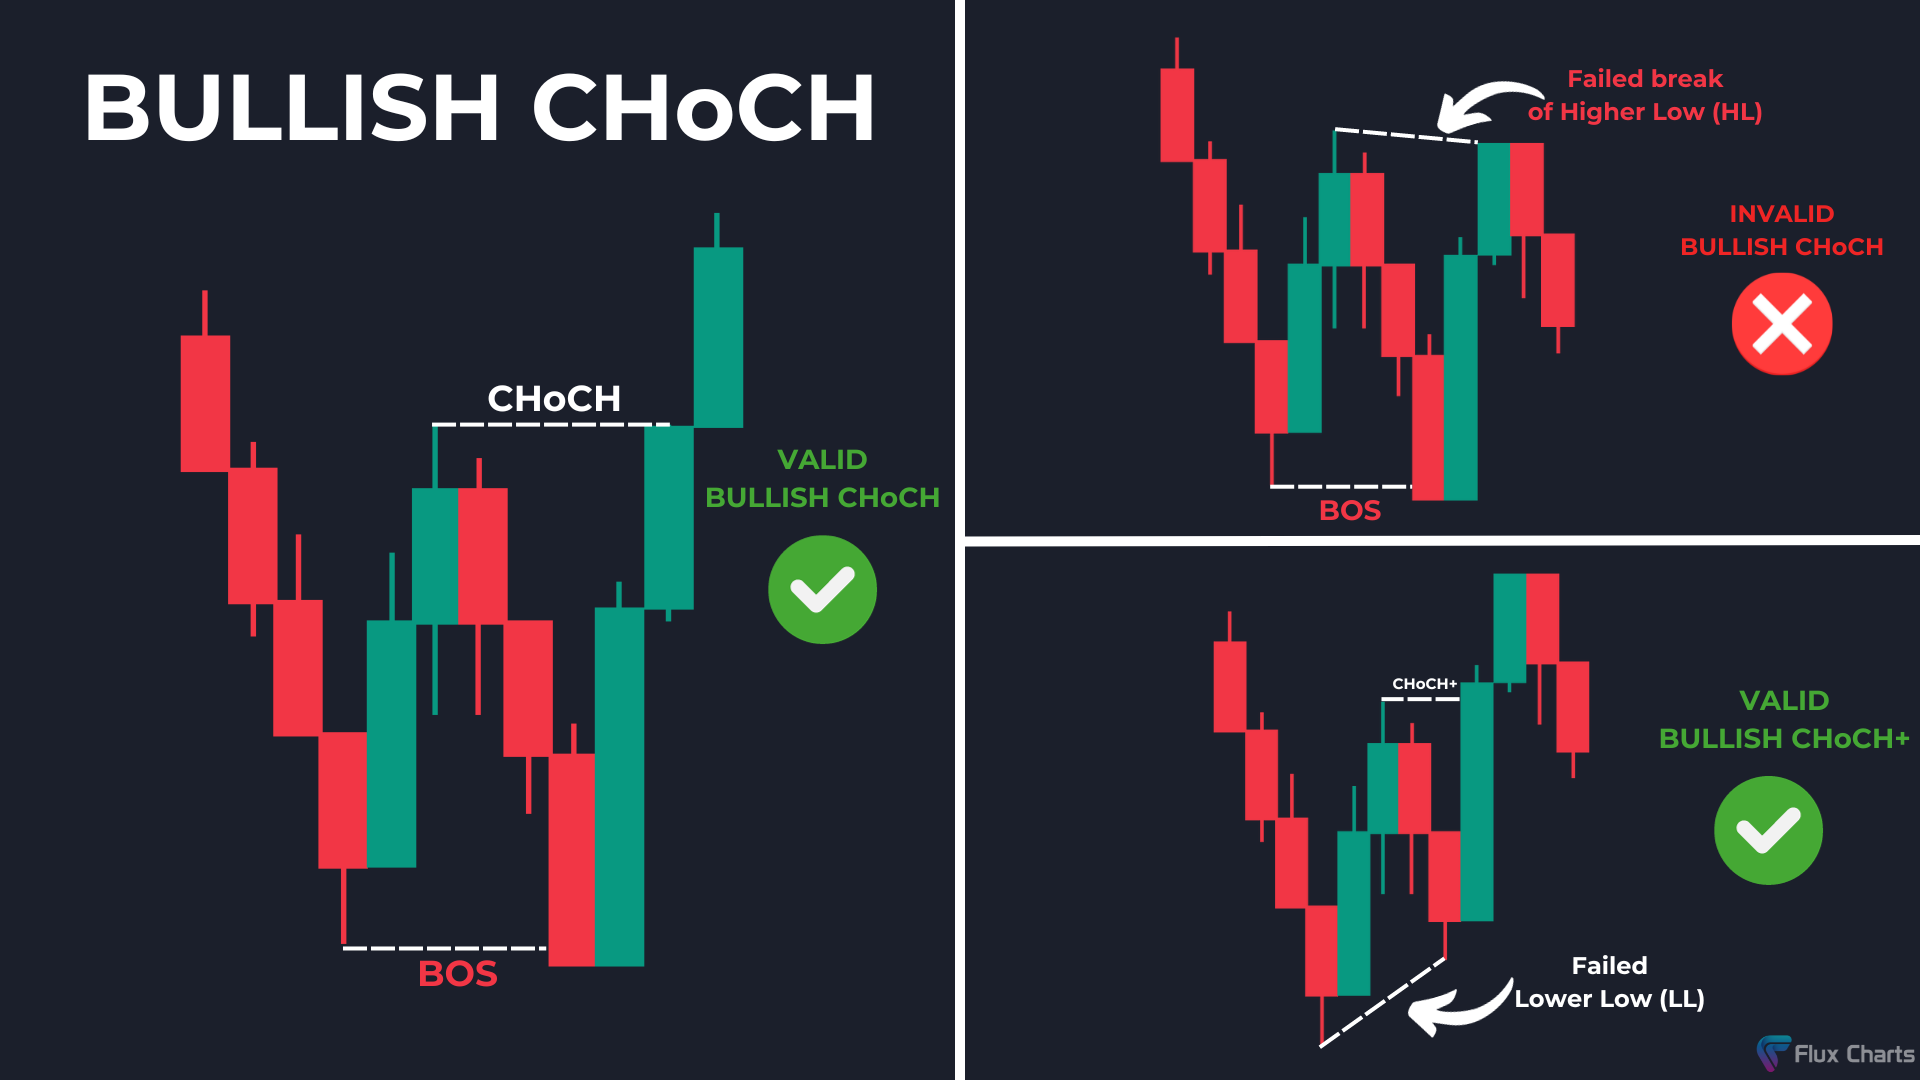 Example of Bullish Change of Character (ChoCh)